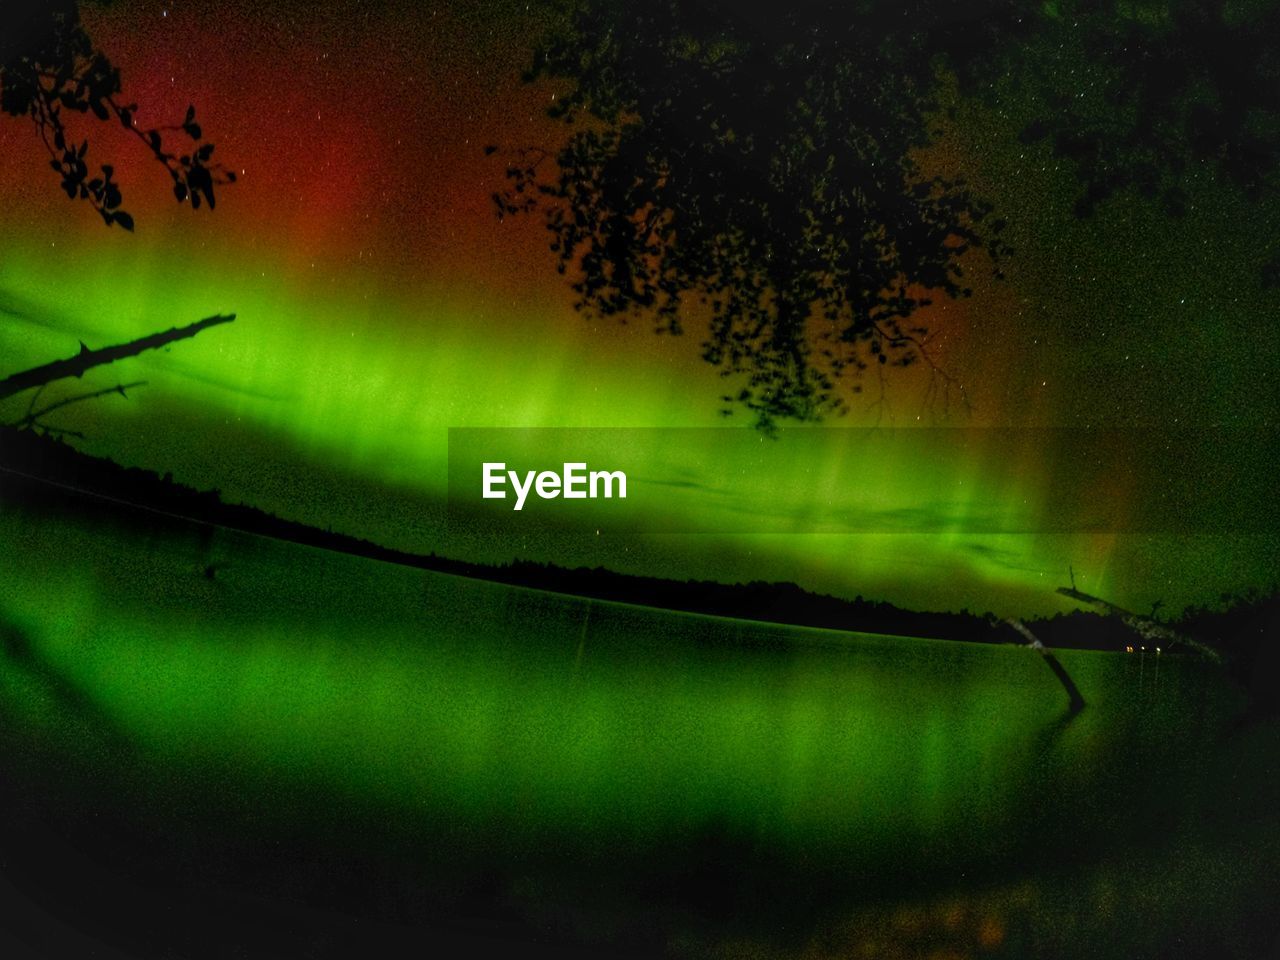 aurora, green, tree, beauty in nature, night, plant, nature, light, scenics - nature, no people, tranquility, sky, star, tranquil scene, illuminated, water, environment, silhouette, land, light - natural phenomenon, landscape, outdoors, lake, darkness, space, forest, astronomy, reflection, dramatic sky